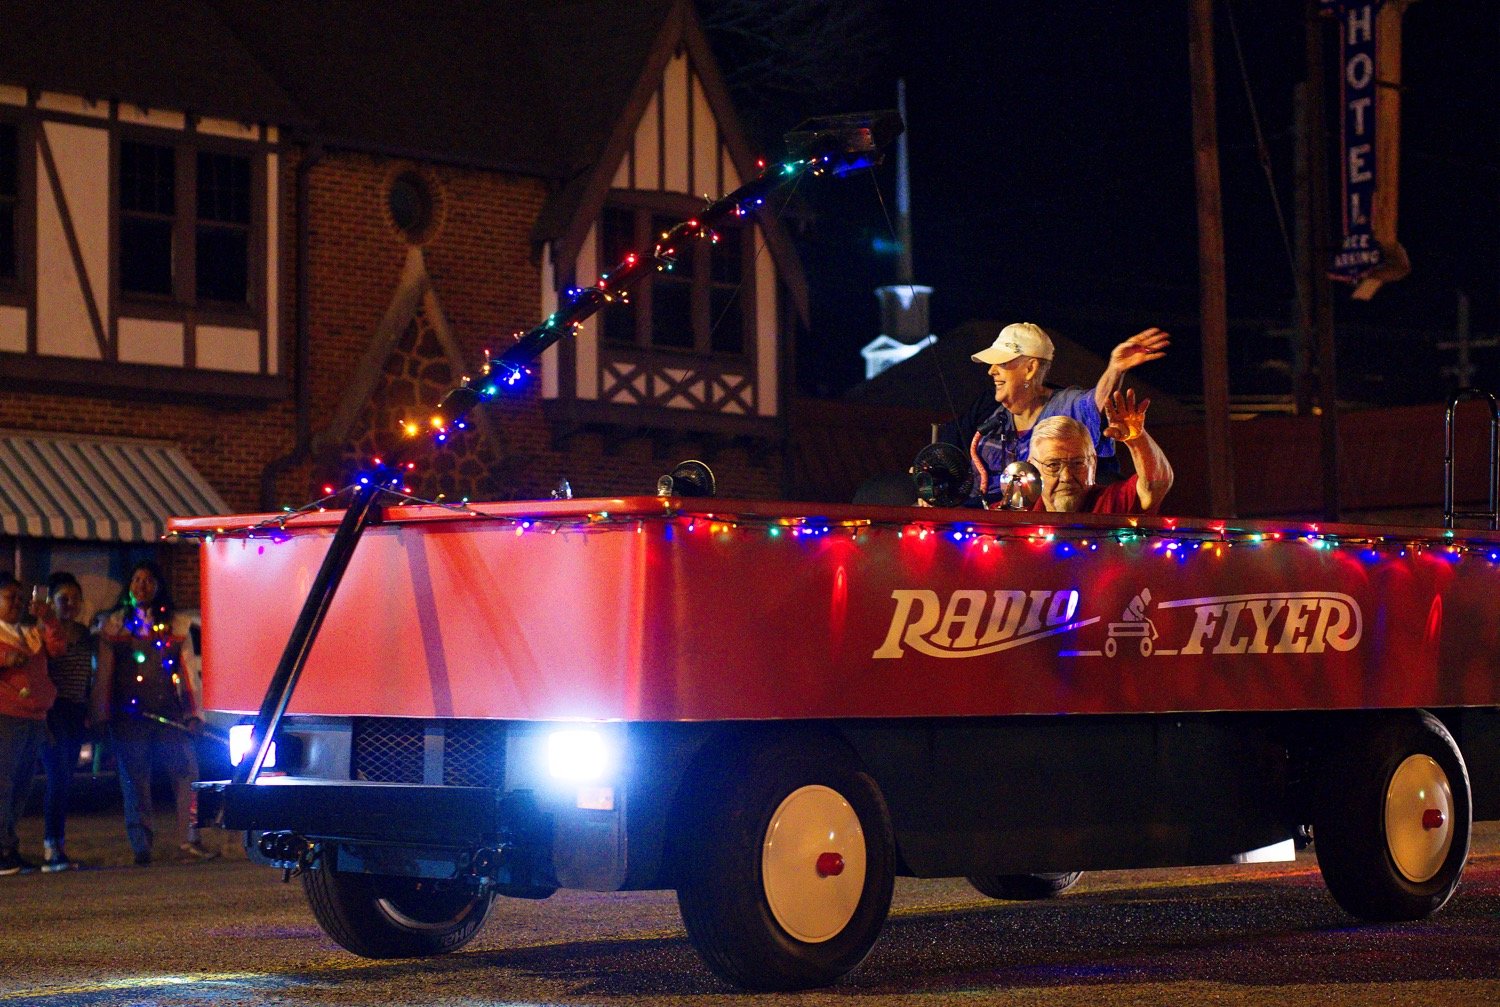 Among the parade contest winners was Richard Sparks’ Radio Flyer, which won the Judges’ Choice Award. [see more of the parade entries]